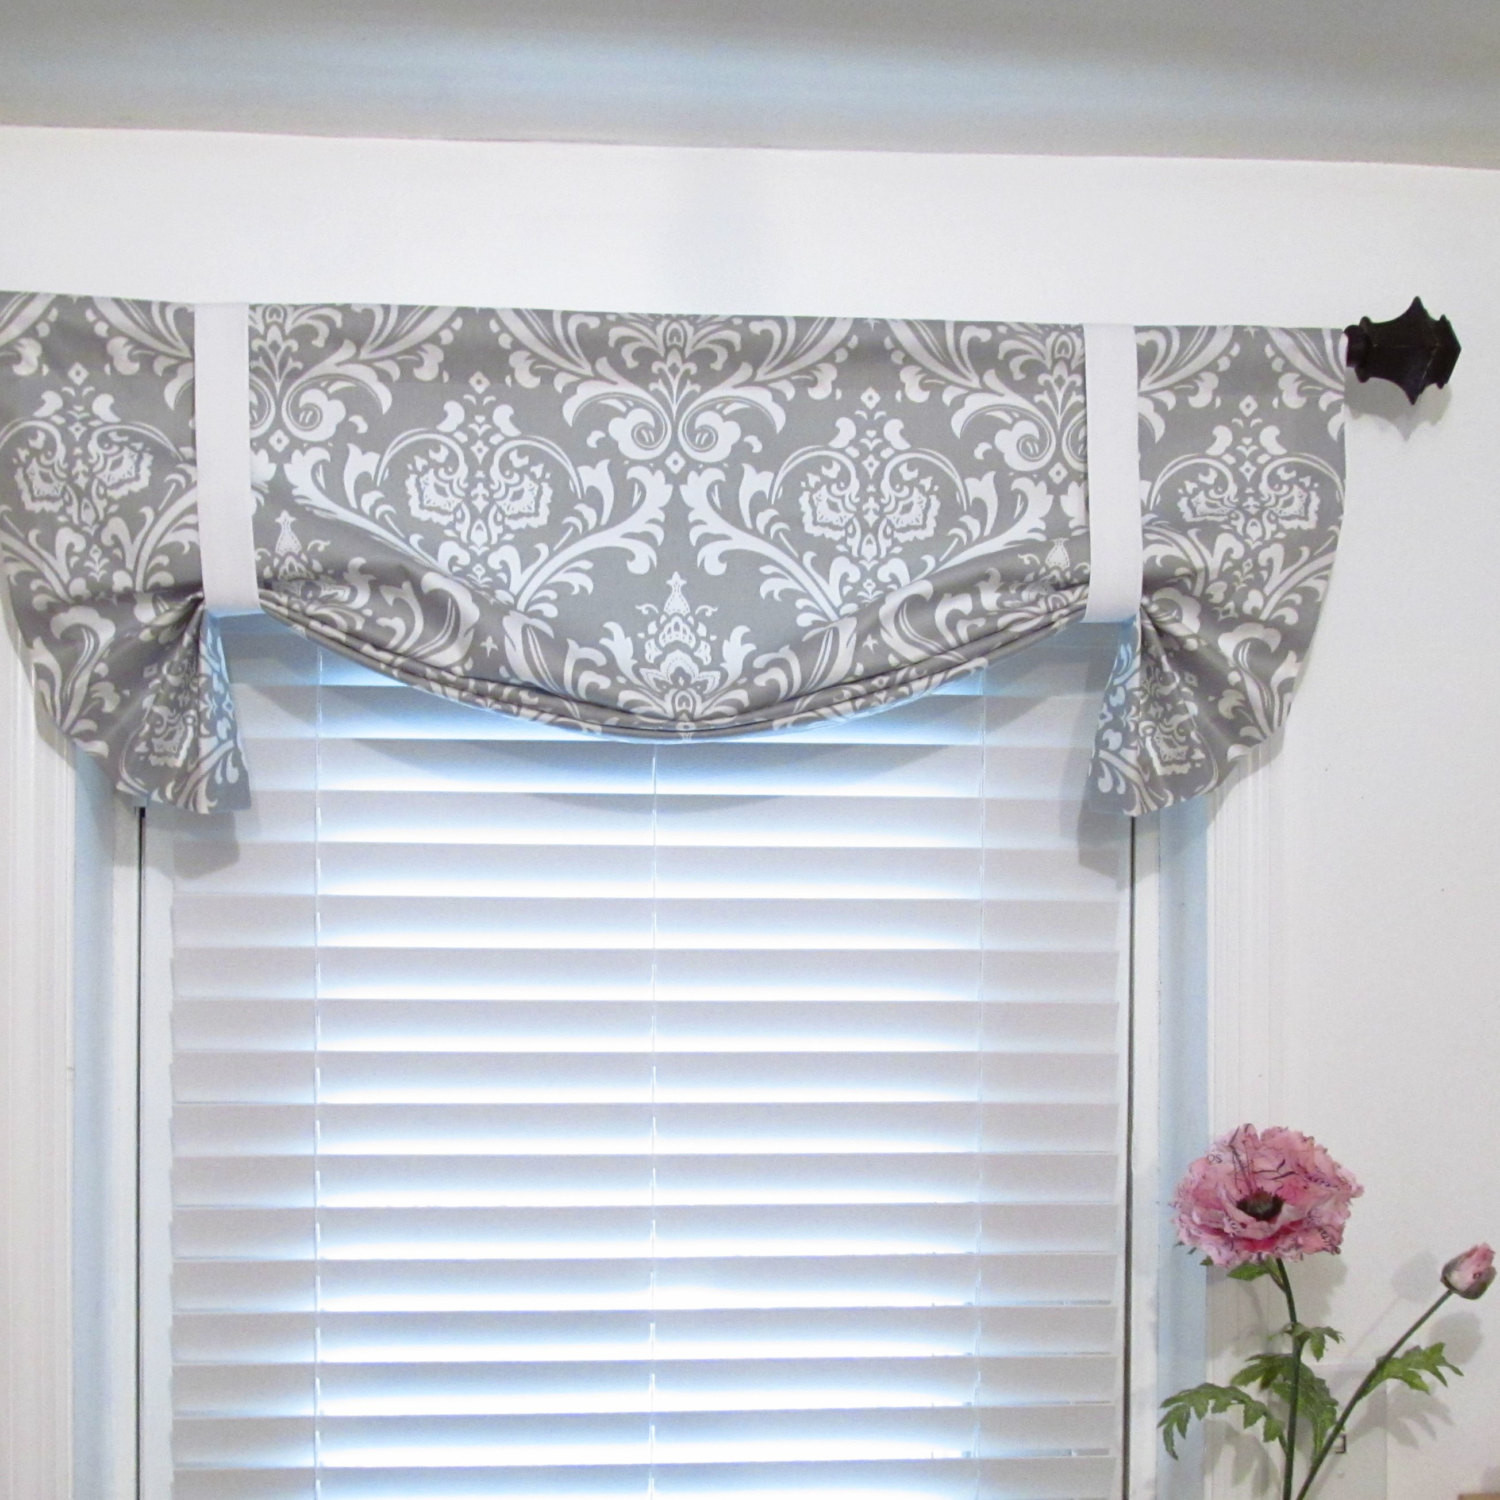 Tie Up Kitchen Curtains Unique Tie Up Curtain Valance Gray White Damask By Supplierofdreams Of Tie Up Kitchen Curtains 